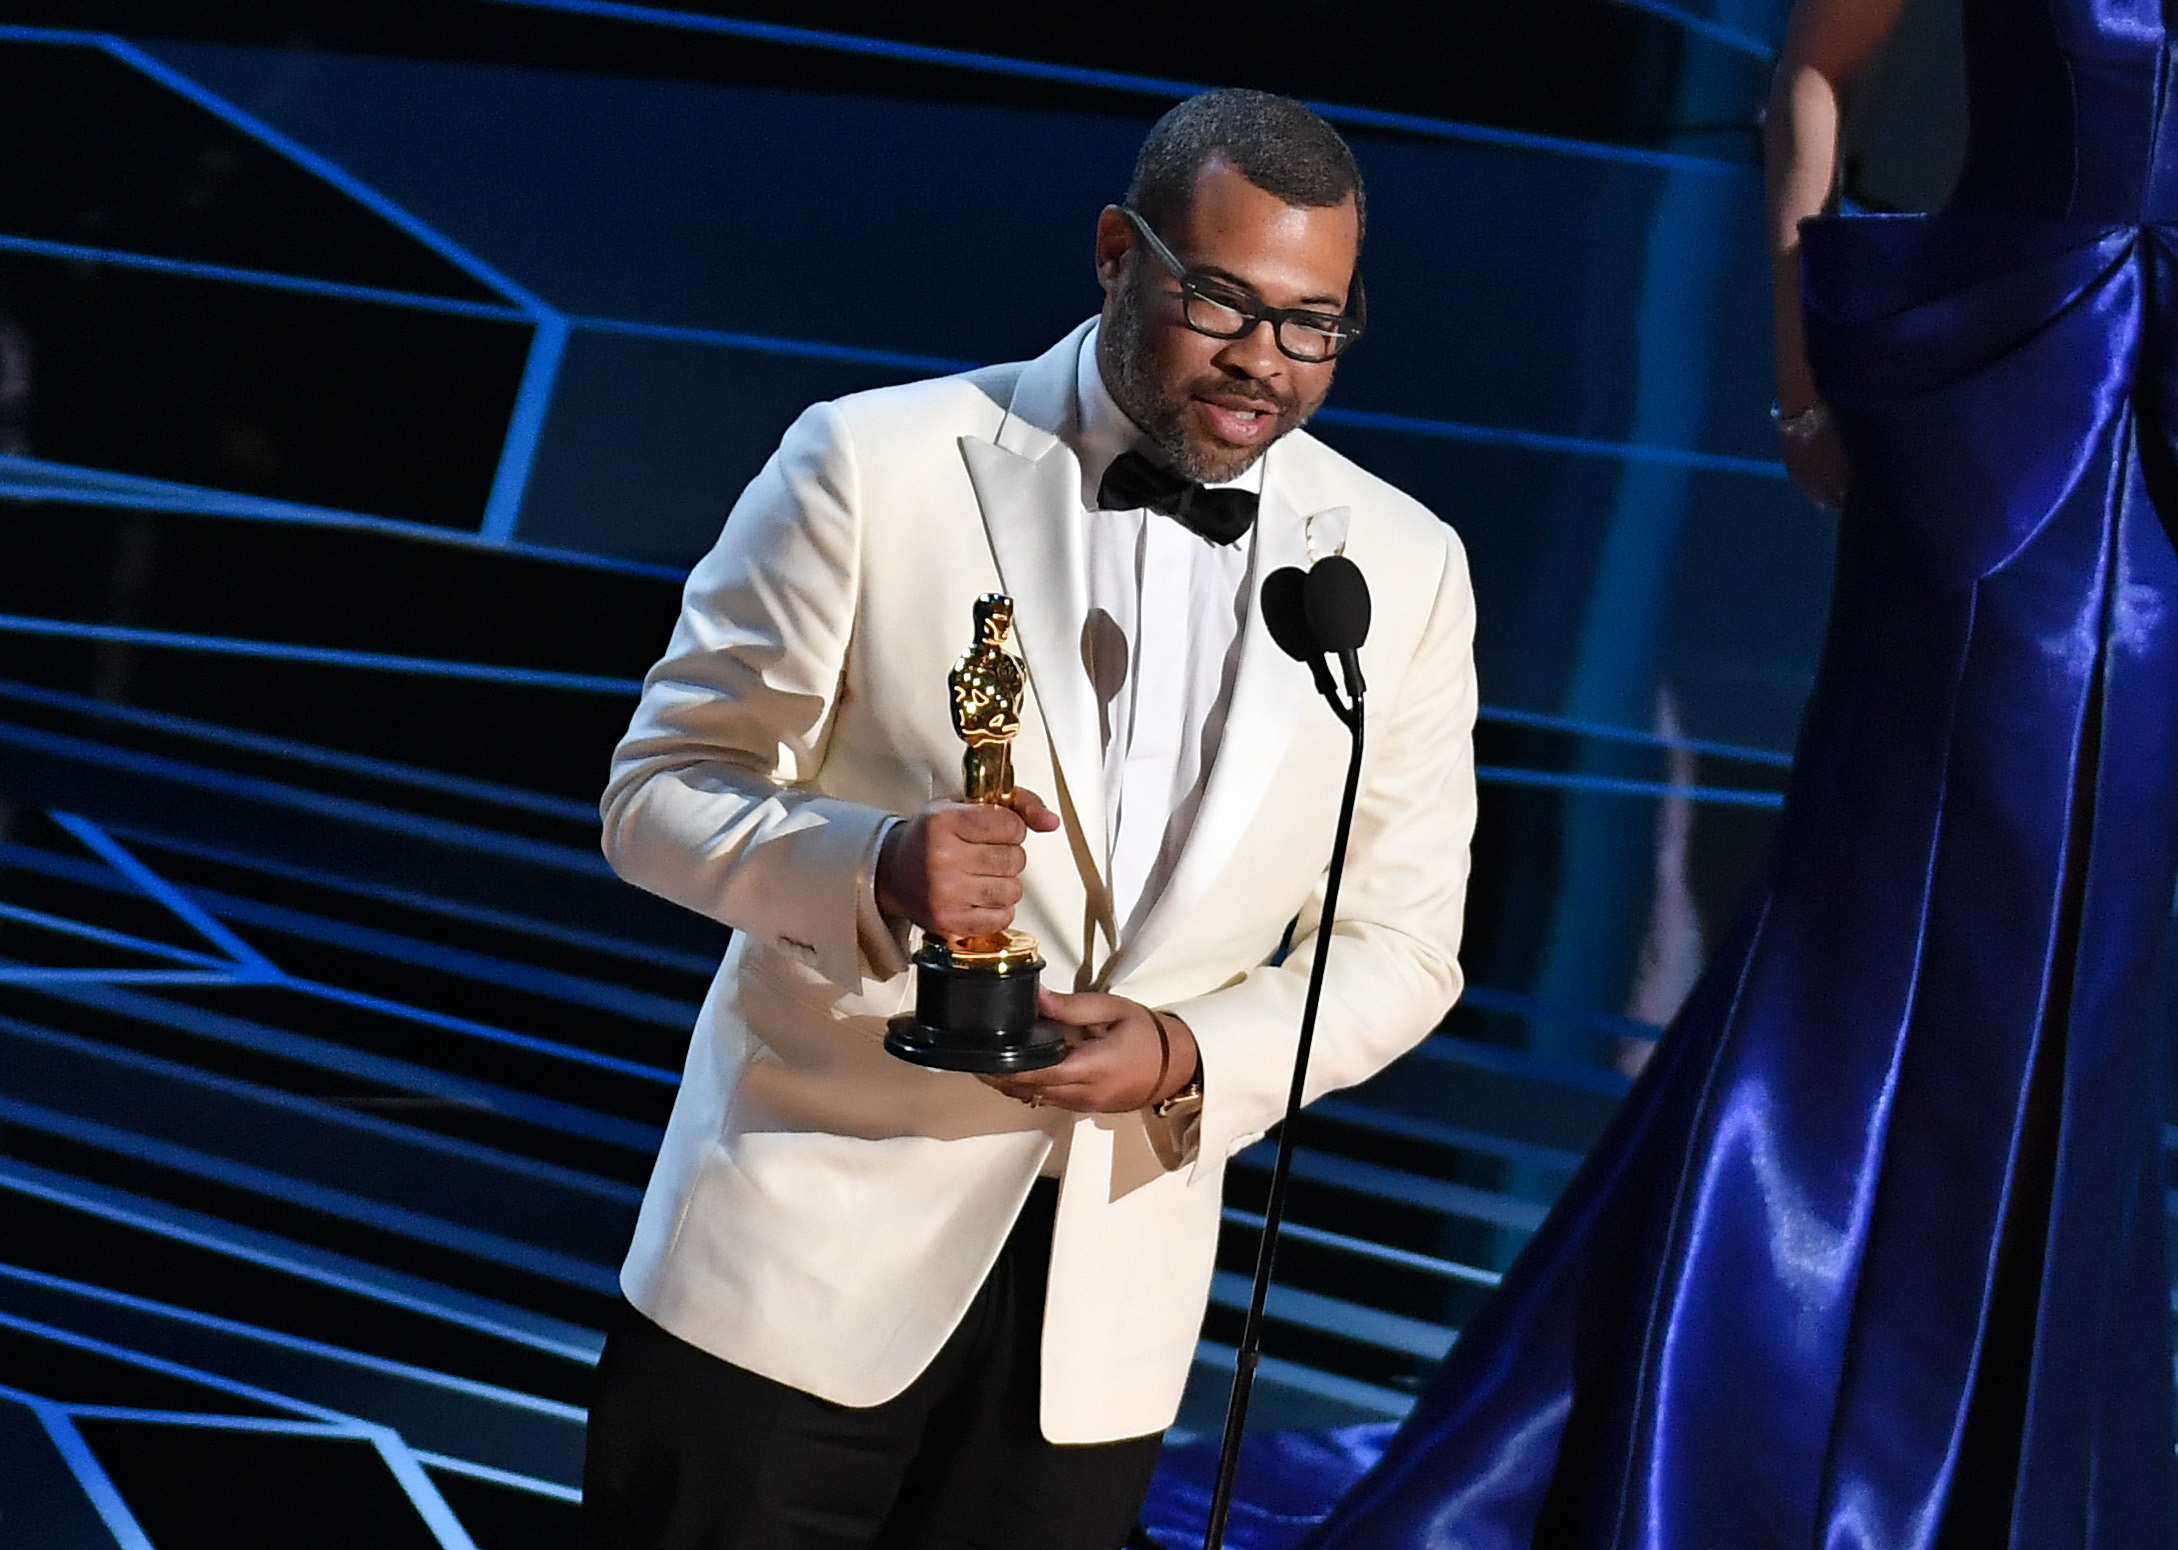 <p>Jordan Peele became the first Black screenwriter to win the Academy Award for best original screenplay when he took home the Oscar for his "Get Out" script during the <a href="https://www.wonderwall.com/awards-events/red-carpet/2018-academy-awards-see-all-stars-red-carpet-3013009.gallery">90th Annual Academy Awards</a> on March 4, 2018.</p><p>Barry Jenkins and Tarell Alvin McCraney won in the best adapted screenplay category in 2017 for "Moonlight," while John Ridley won in 2014 for adapting "12 Years a Slave." </p><p>Geoffrey Fletcher, meanwhile, became the first Black writer to win an Oscar for writing -- period -- when he took home the best adapted screenplay Oscar for "Precious" in 2010.</p>